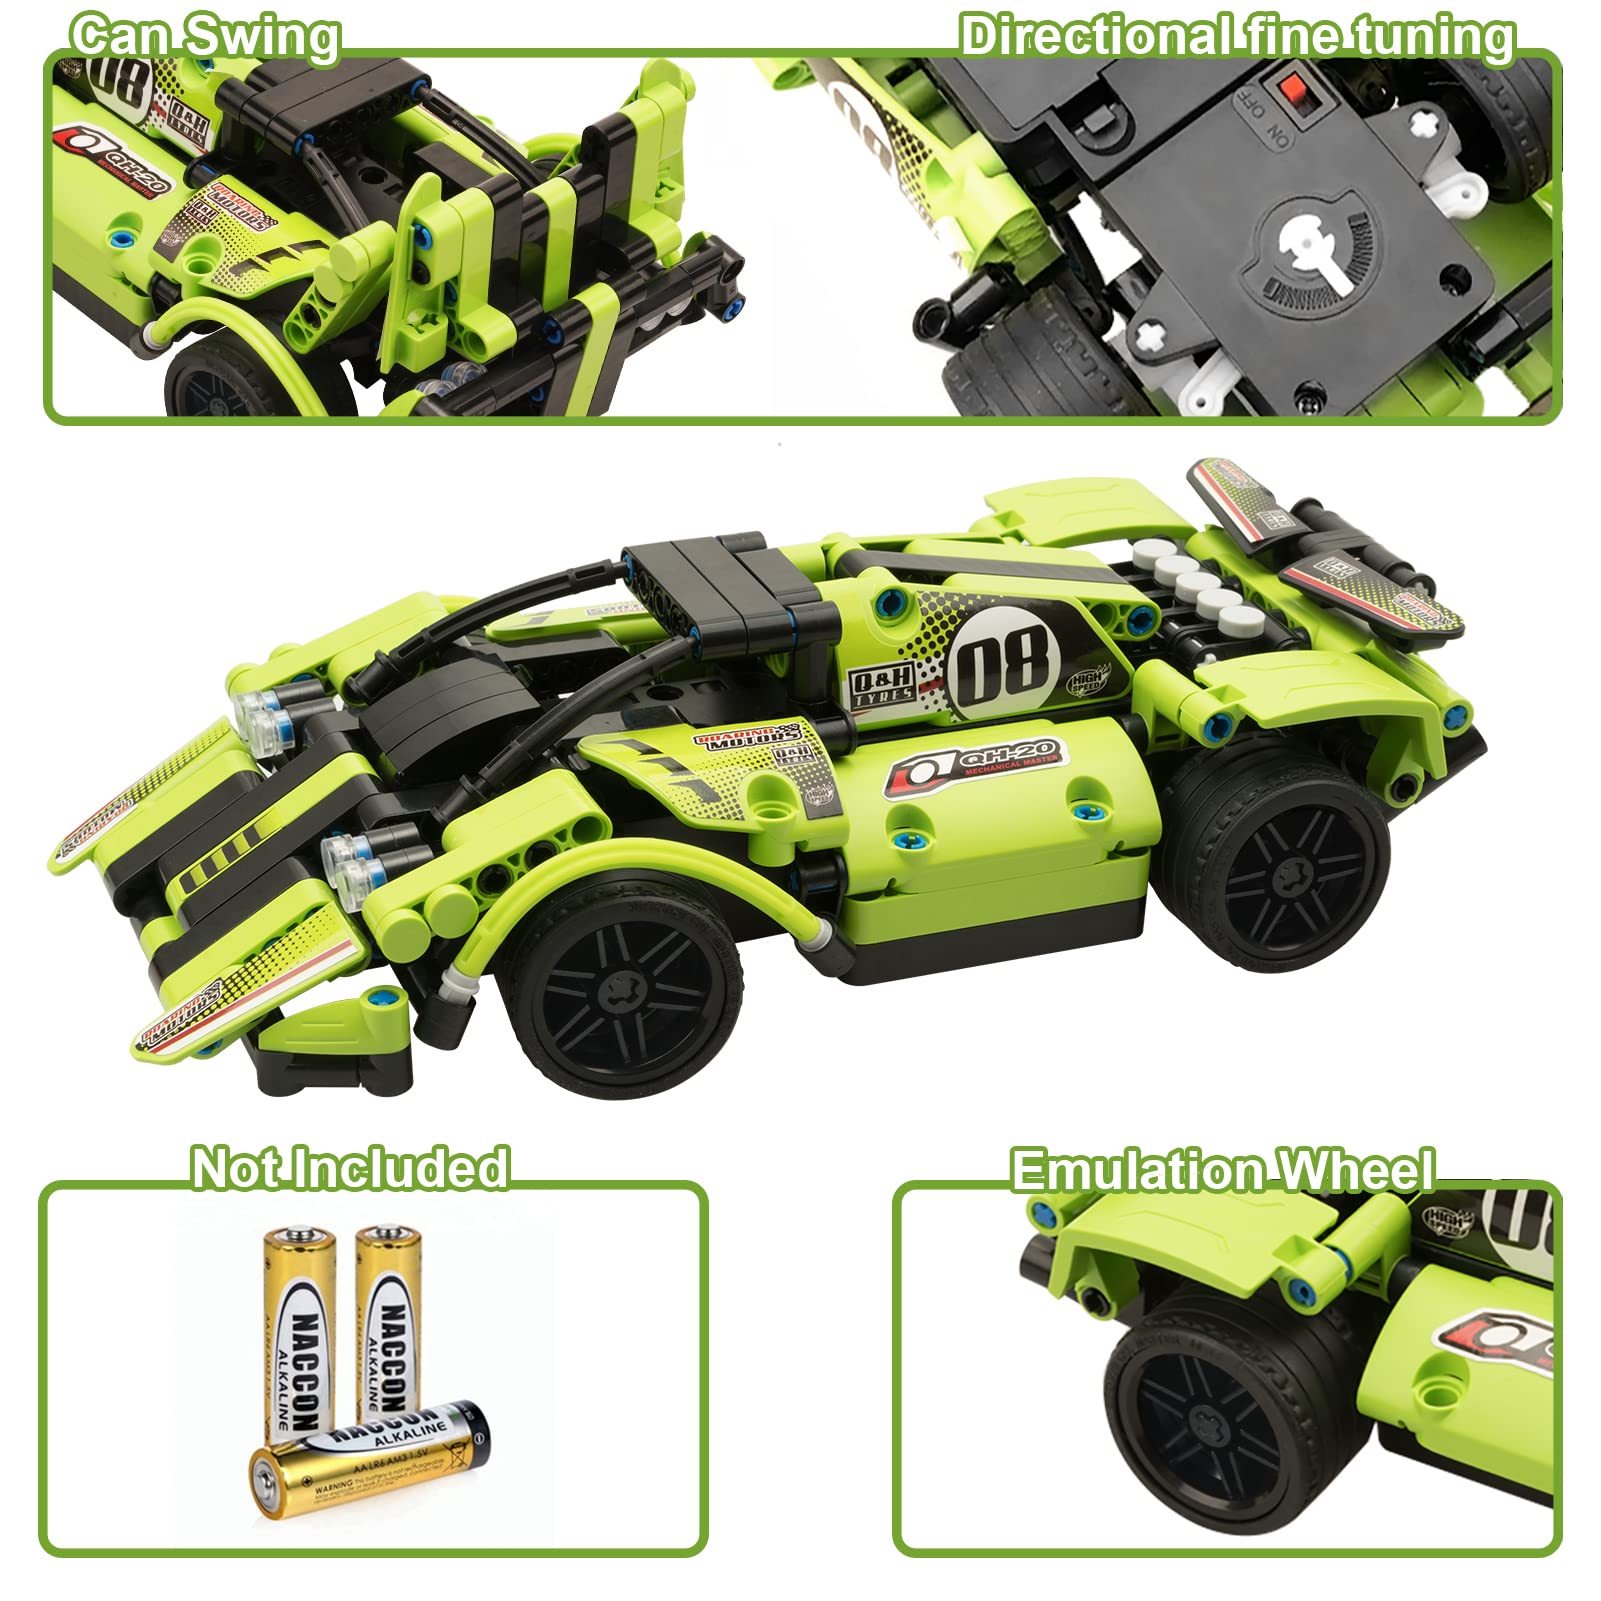 GAMZOO STEM Building Toys for Kids with 2-in-1 Remote Control Racer Snap Together Engineering Kits Early Learning Racecar Building Blocks and Off-Road Best Gift for 6 7 8 and 9＋Year Old Boys and Girls